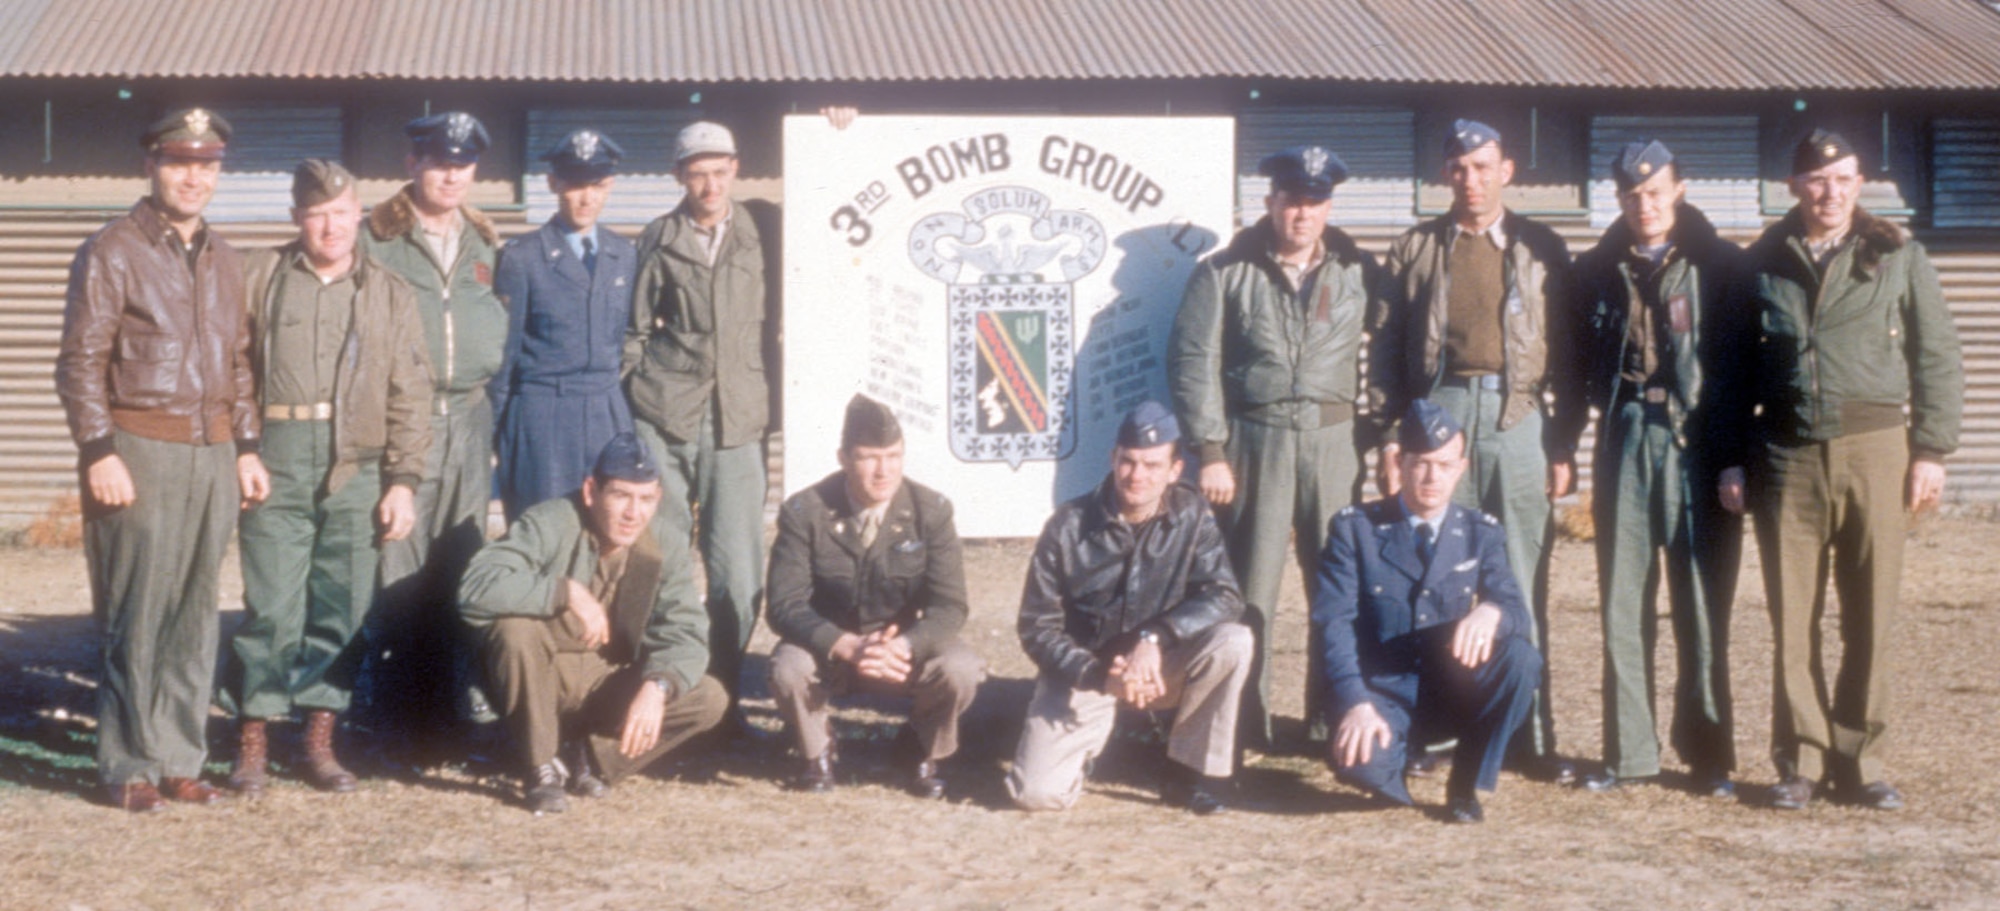 The varied uniforms in this photograph illustrate the USAF in transition during the Korean War. Some wear the old uniform of the U.S. Army Air Forces (USAAF) while others wear newly issued USAF blues or a combination of both. (U.S. Air Force photo)